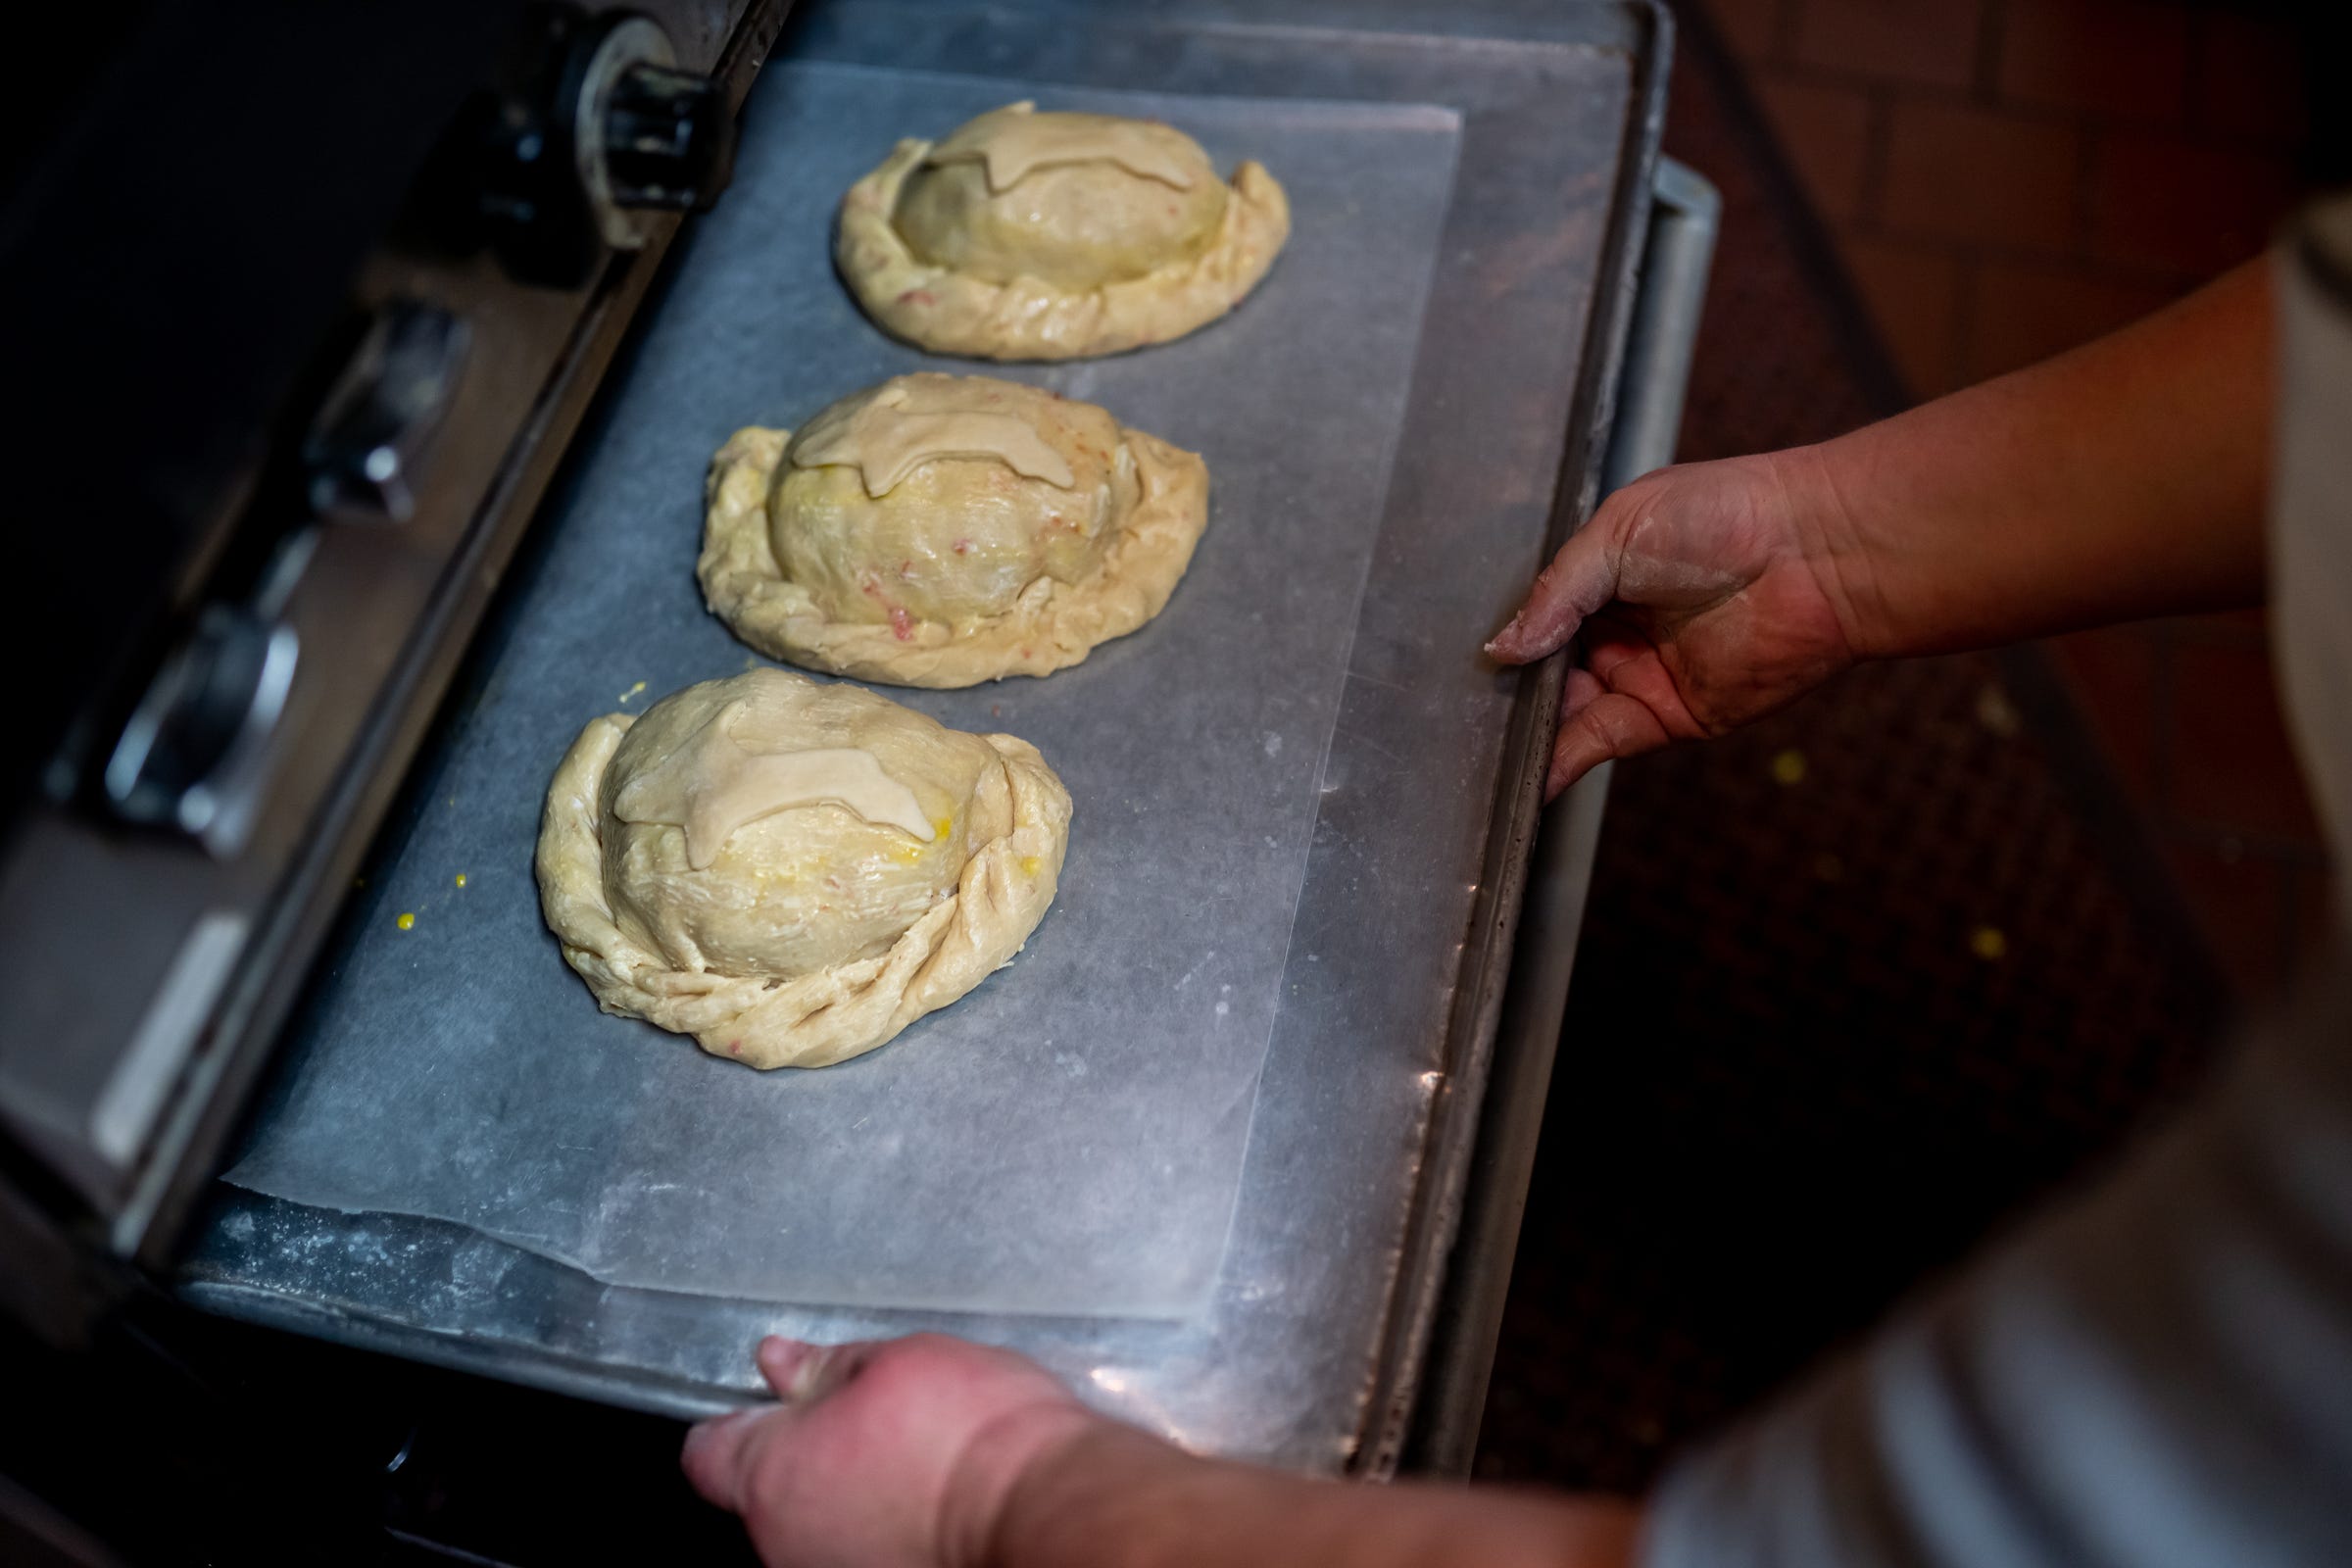 Shannon's Home Cooking owner Shannon Greathouse makes pasties as part of a special-order request from some out of towners at her restaurant in Gwinn on Wednesday, Oct. 20, 2021.